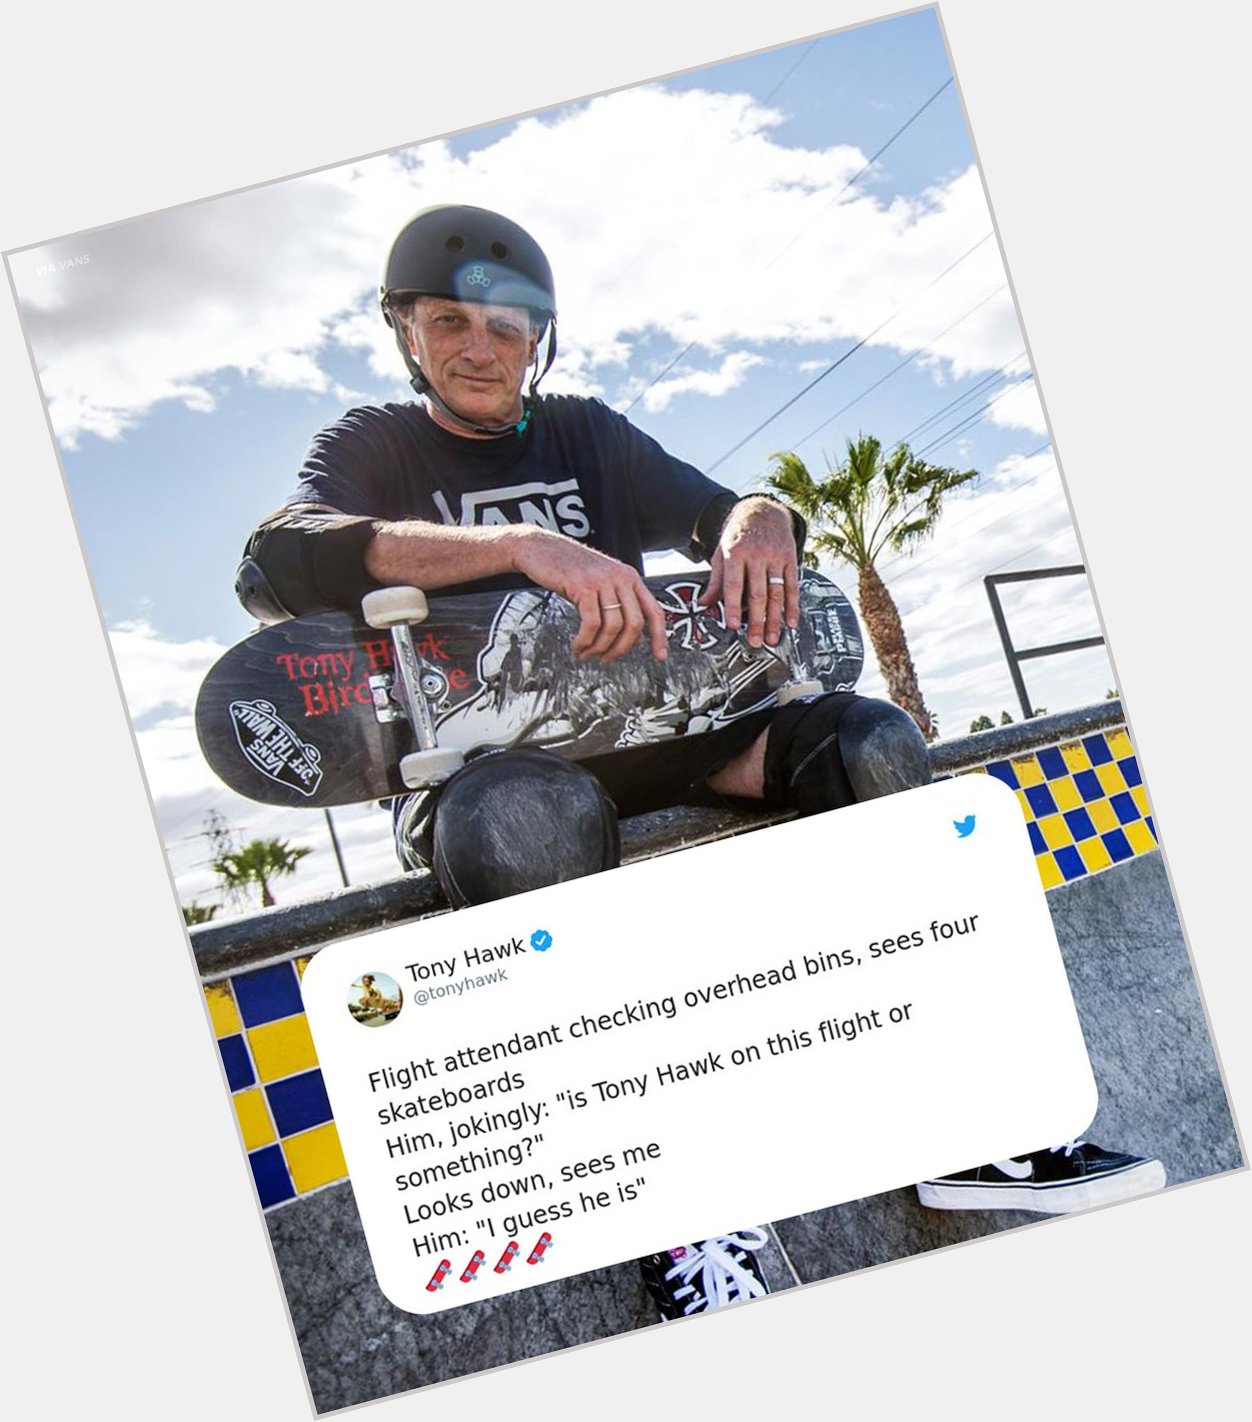 Tony Hawk\s messages about being Tony Hawk are the best Happy Birthday, Birdman! 